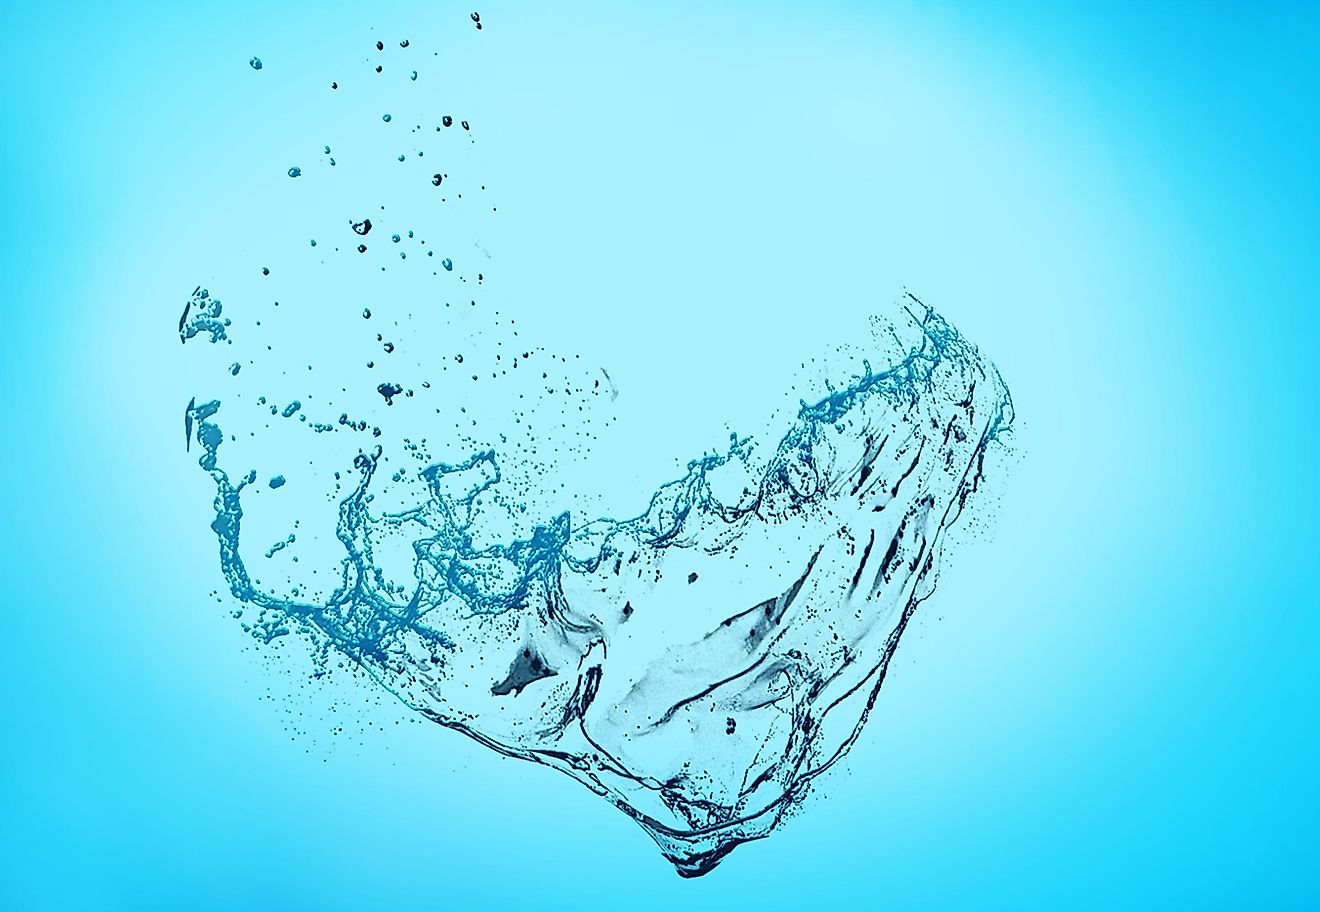 Water is one of the most important sources of life for us, and not only is it healthy, but it is also a unique substance with some interesting properties.